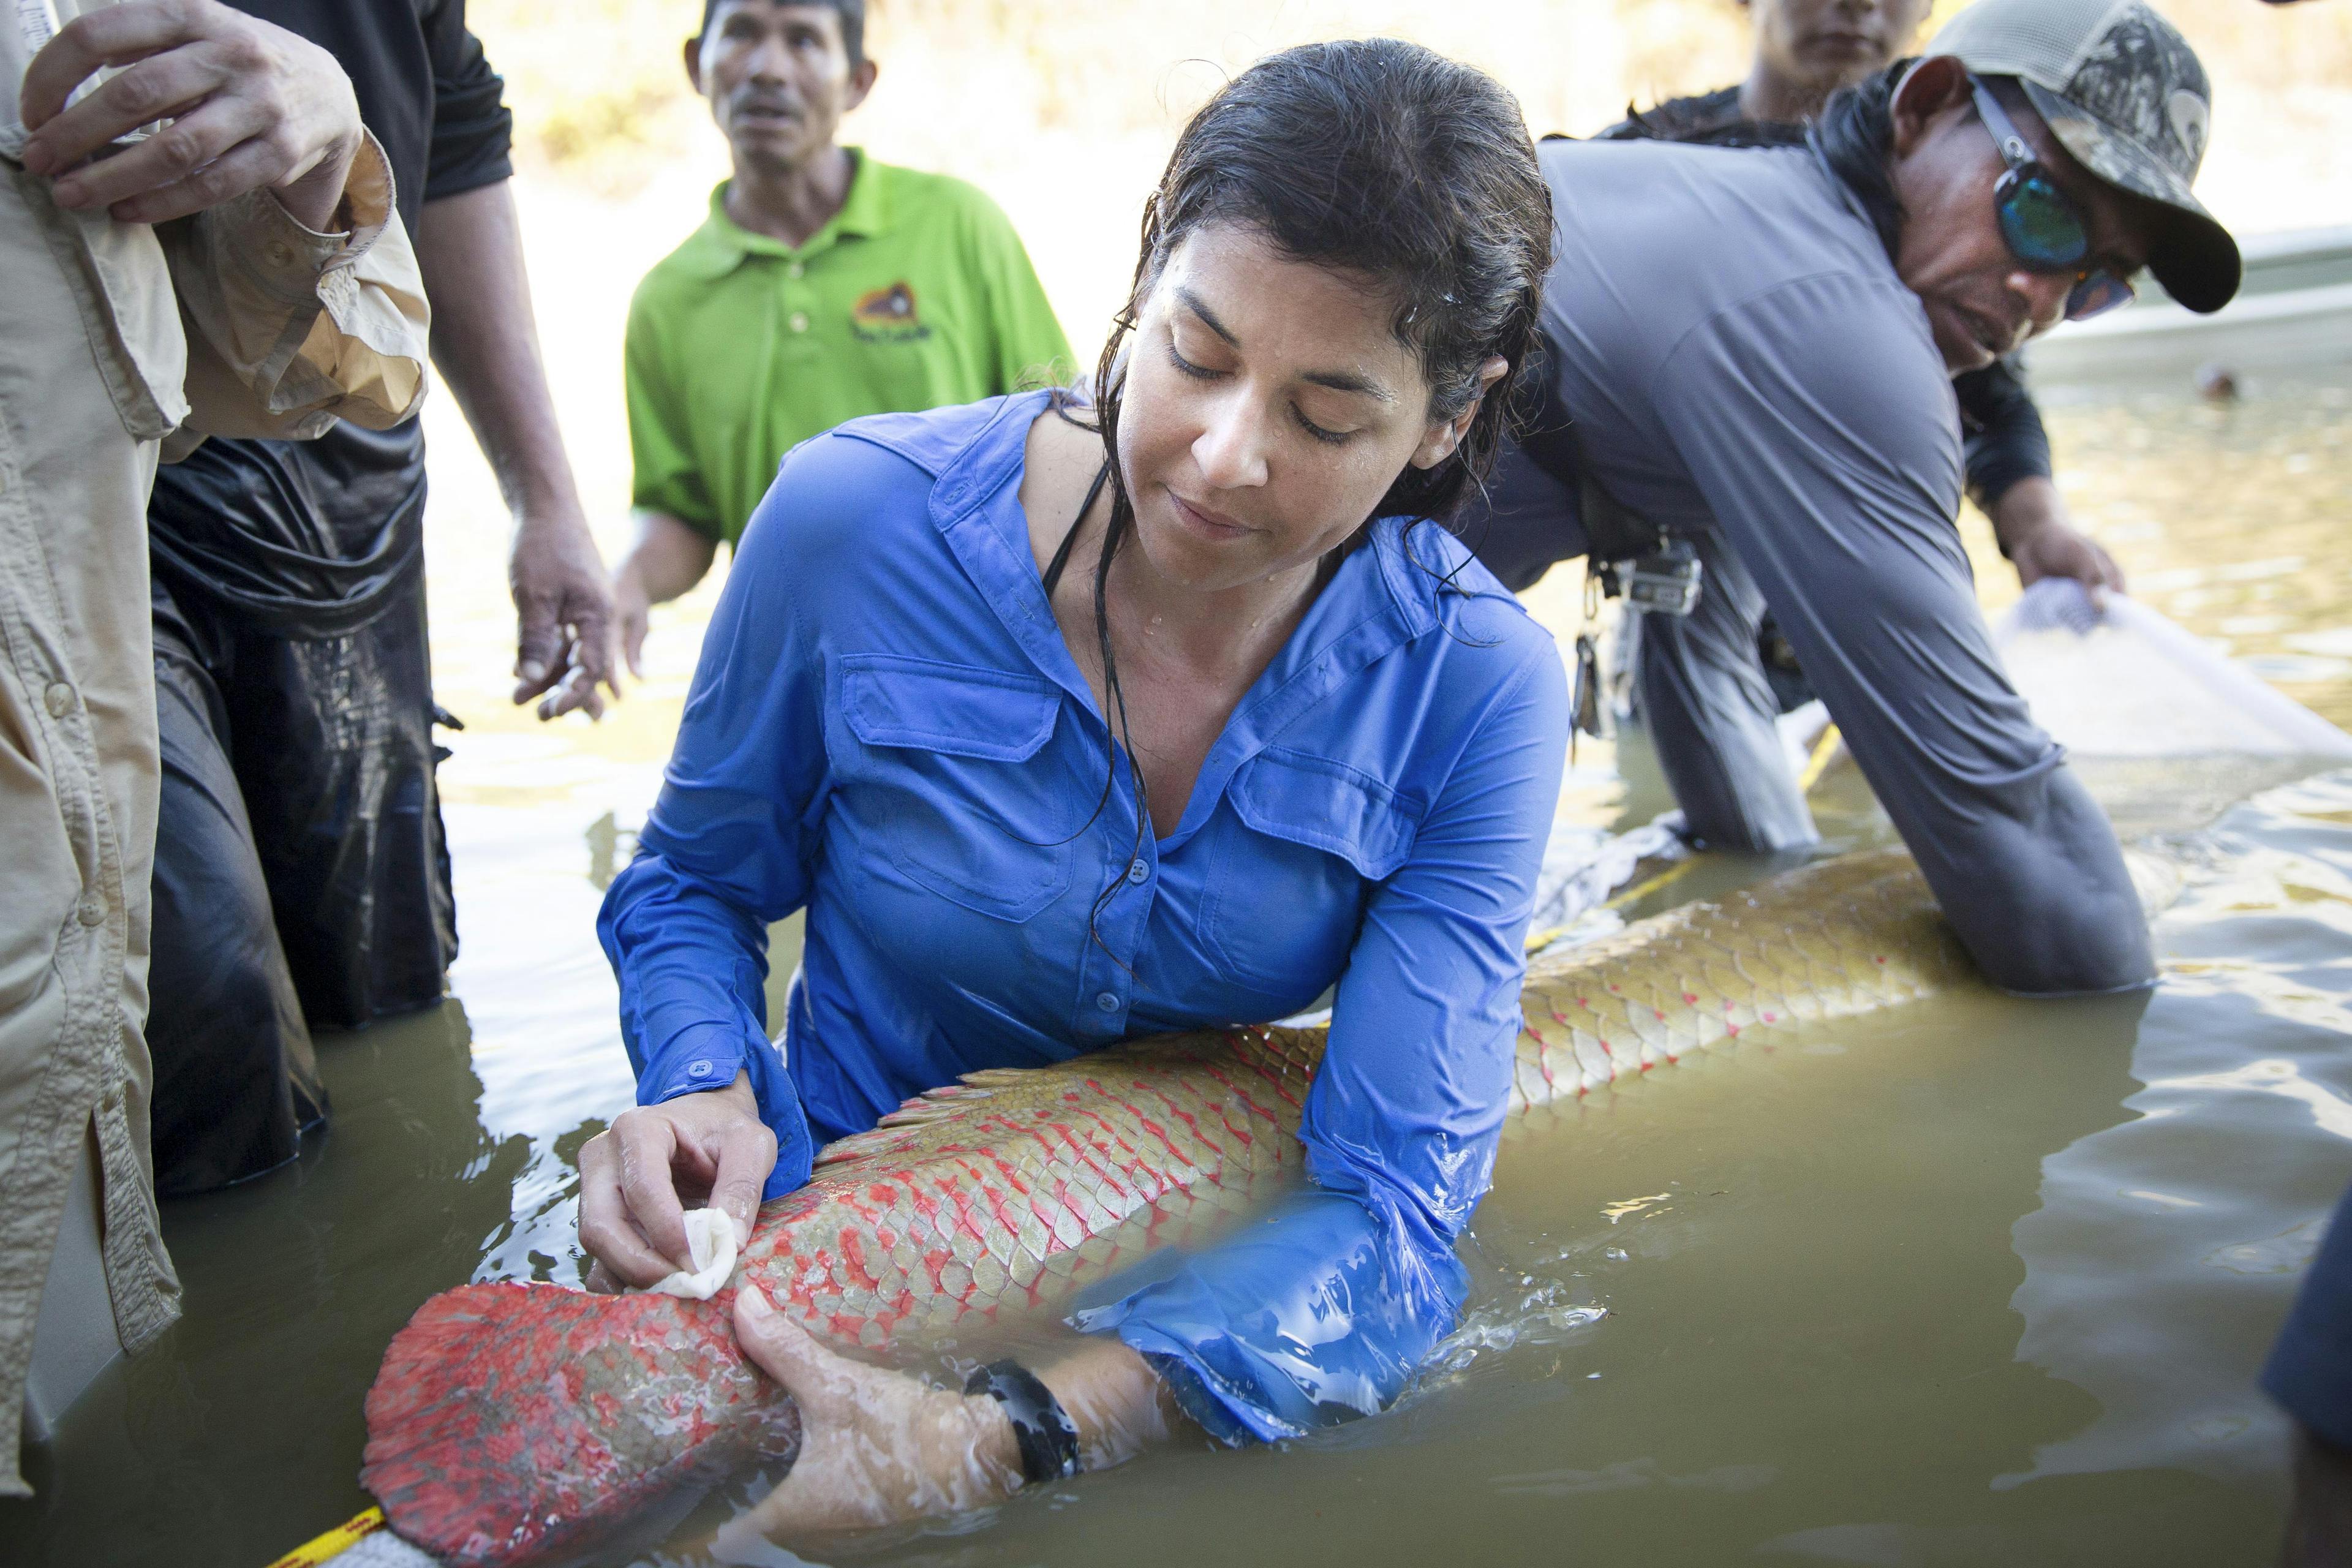 A woman, standing waist deep in water, tags an arapaima, a large freshwater fish. A man helps to hold the fish while several people in the background watch.